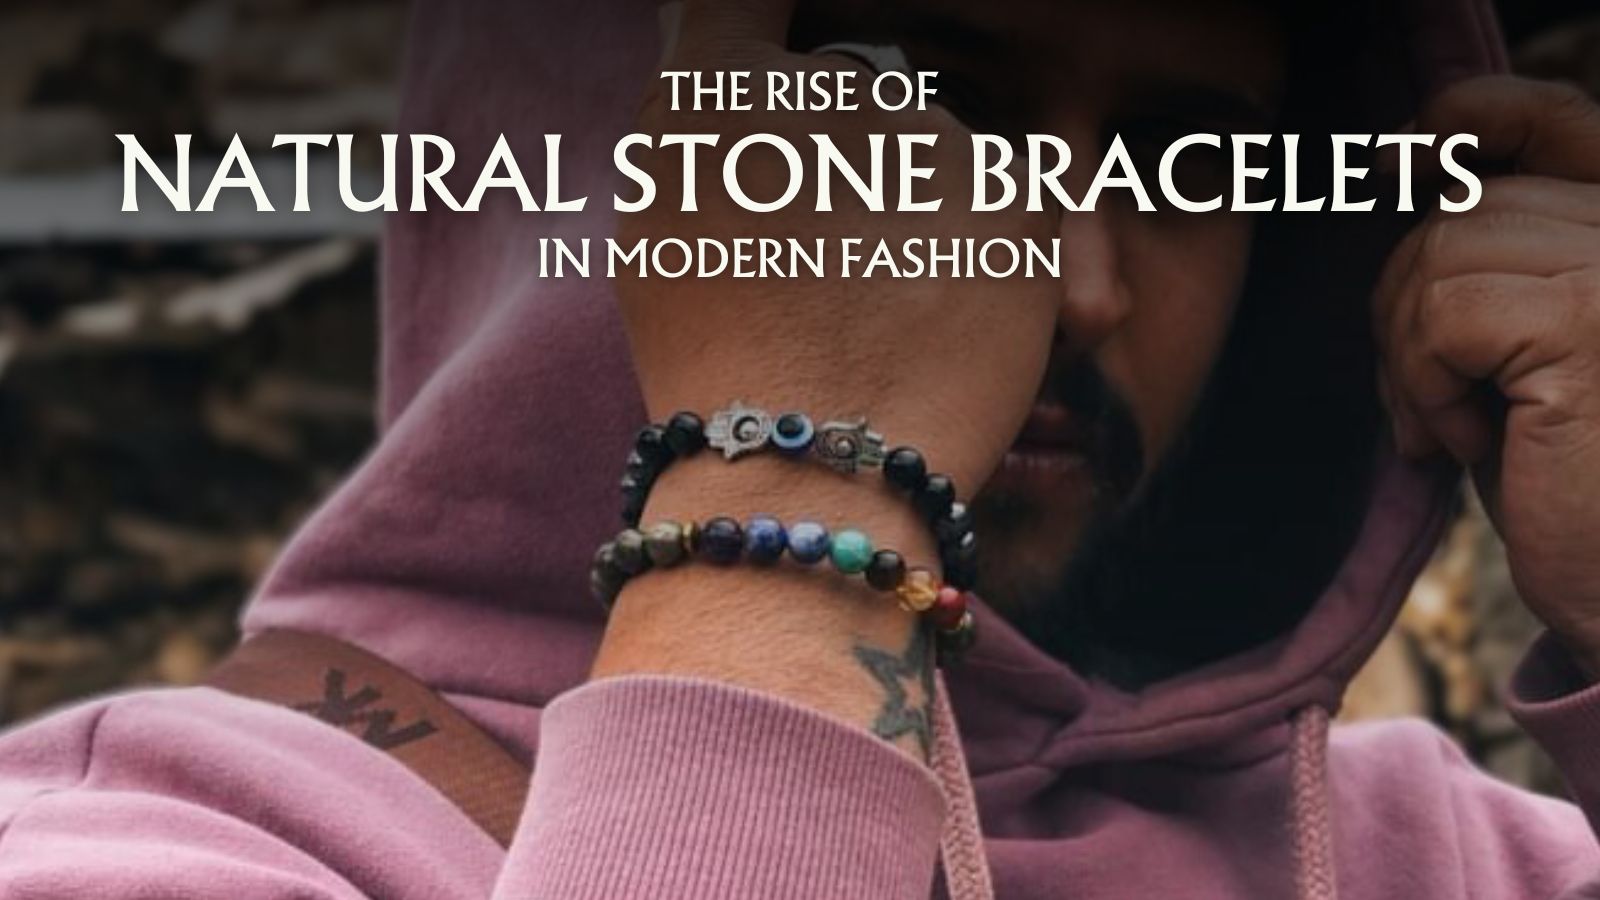 The Rise of Natural Stone Bracelets in Modern Fashion